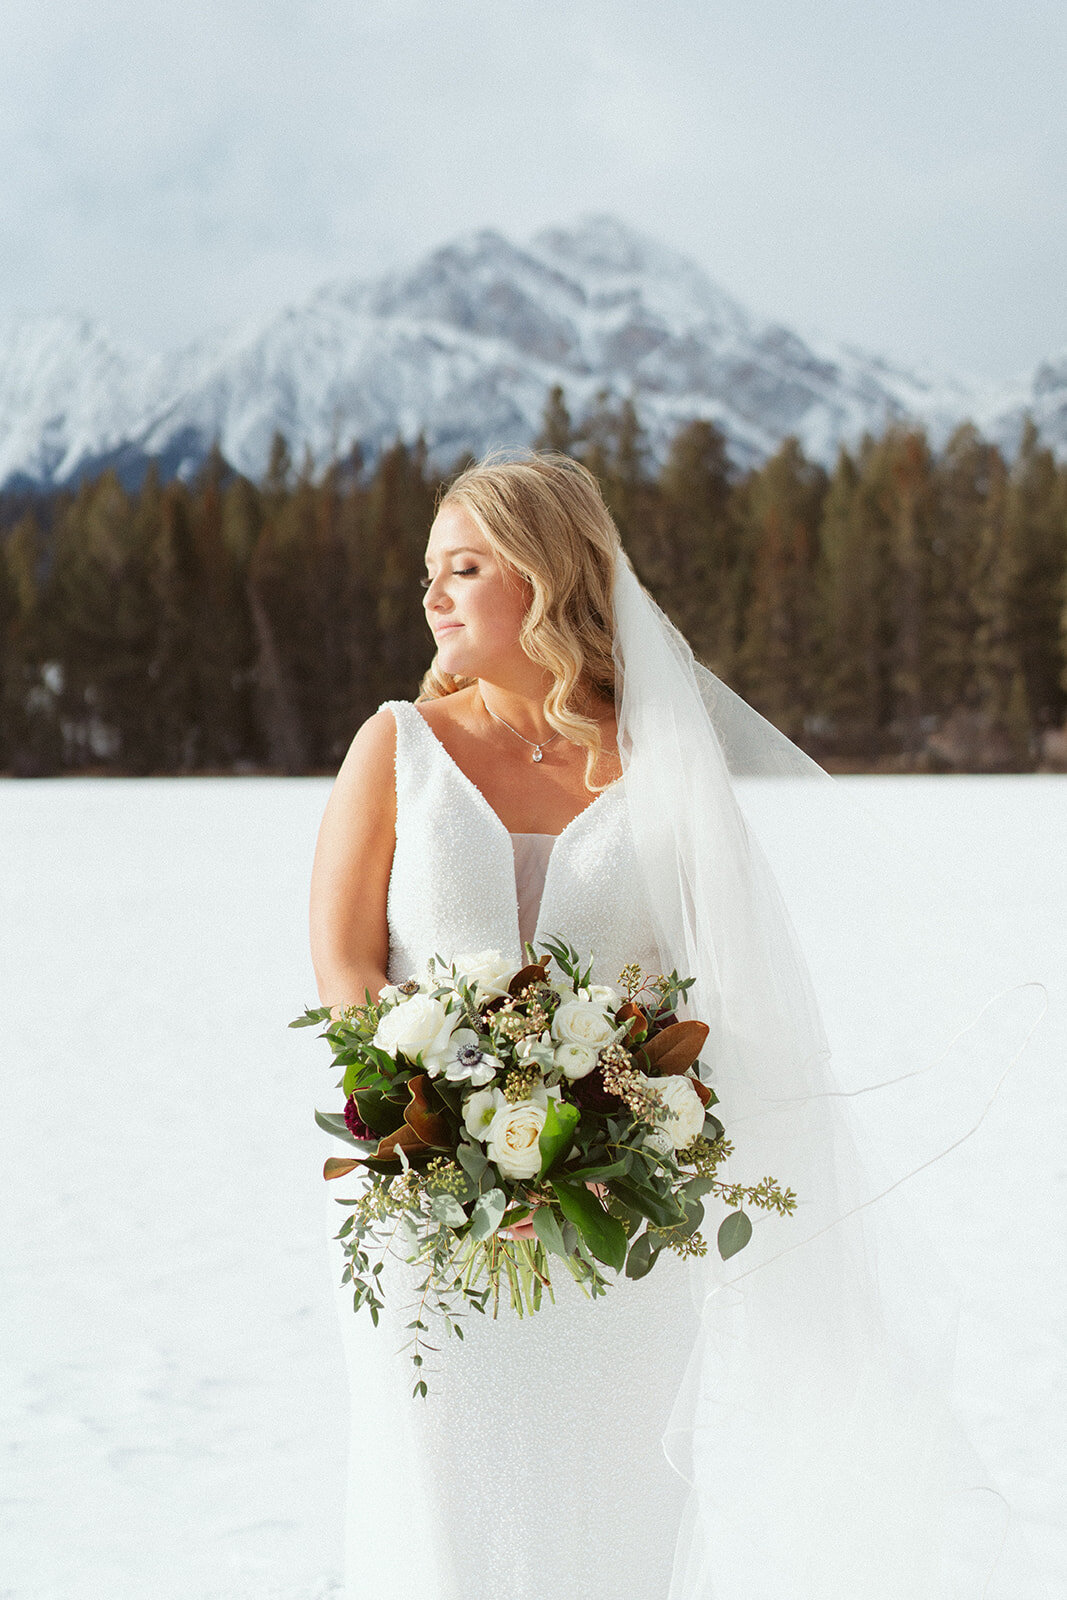 Bride posing outdoors with mountains.